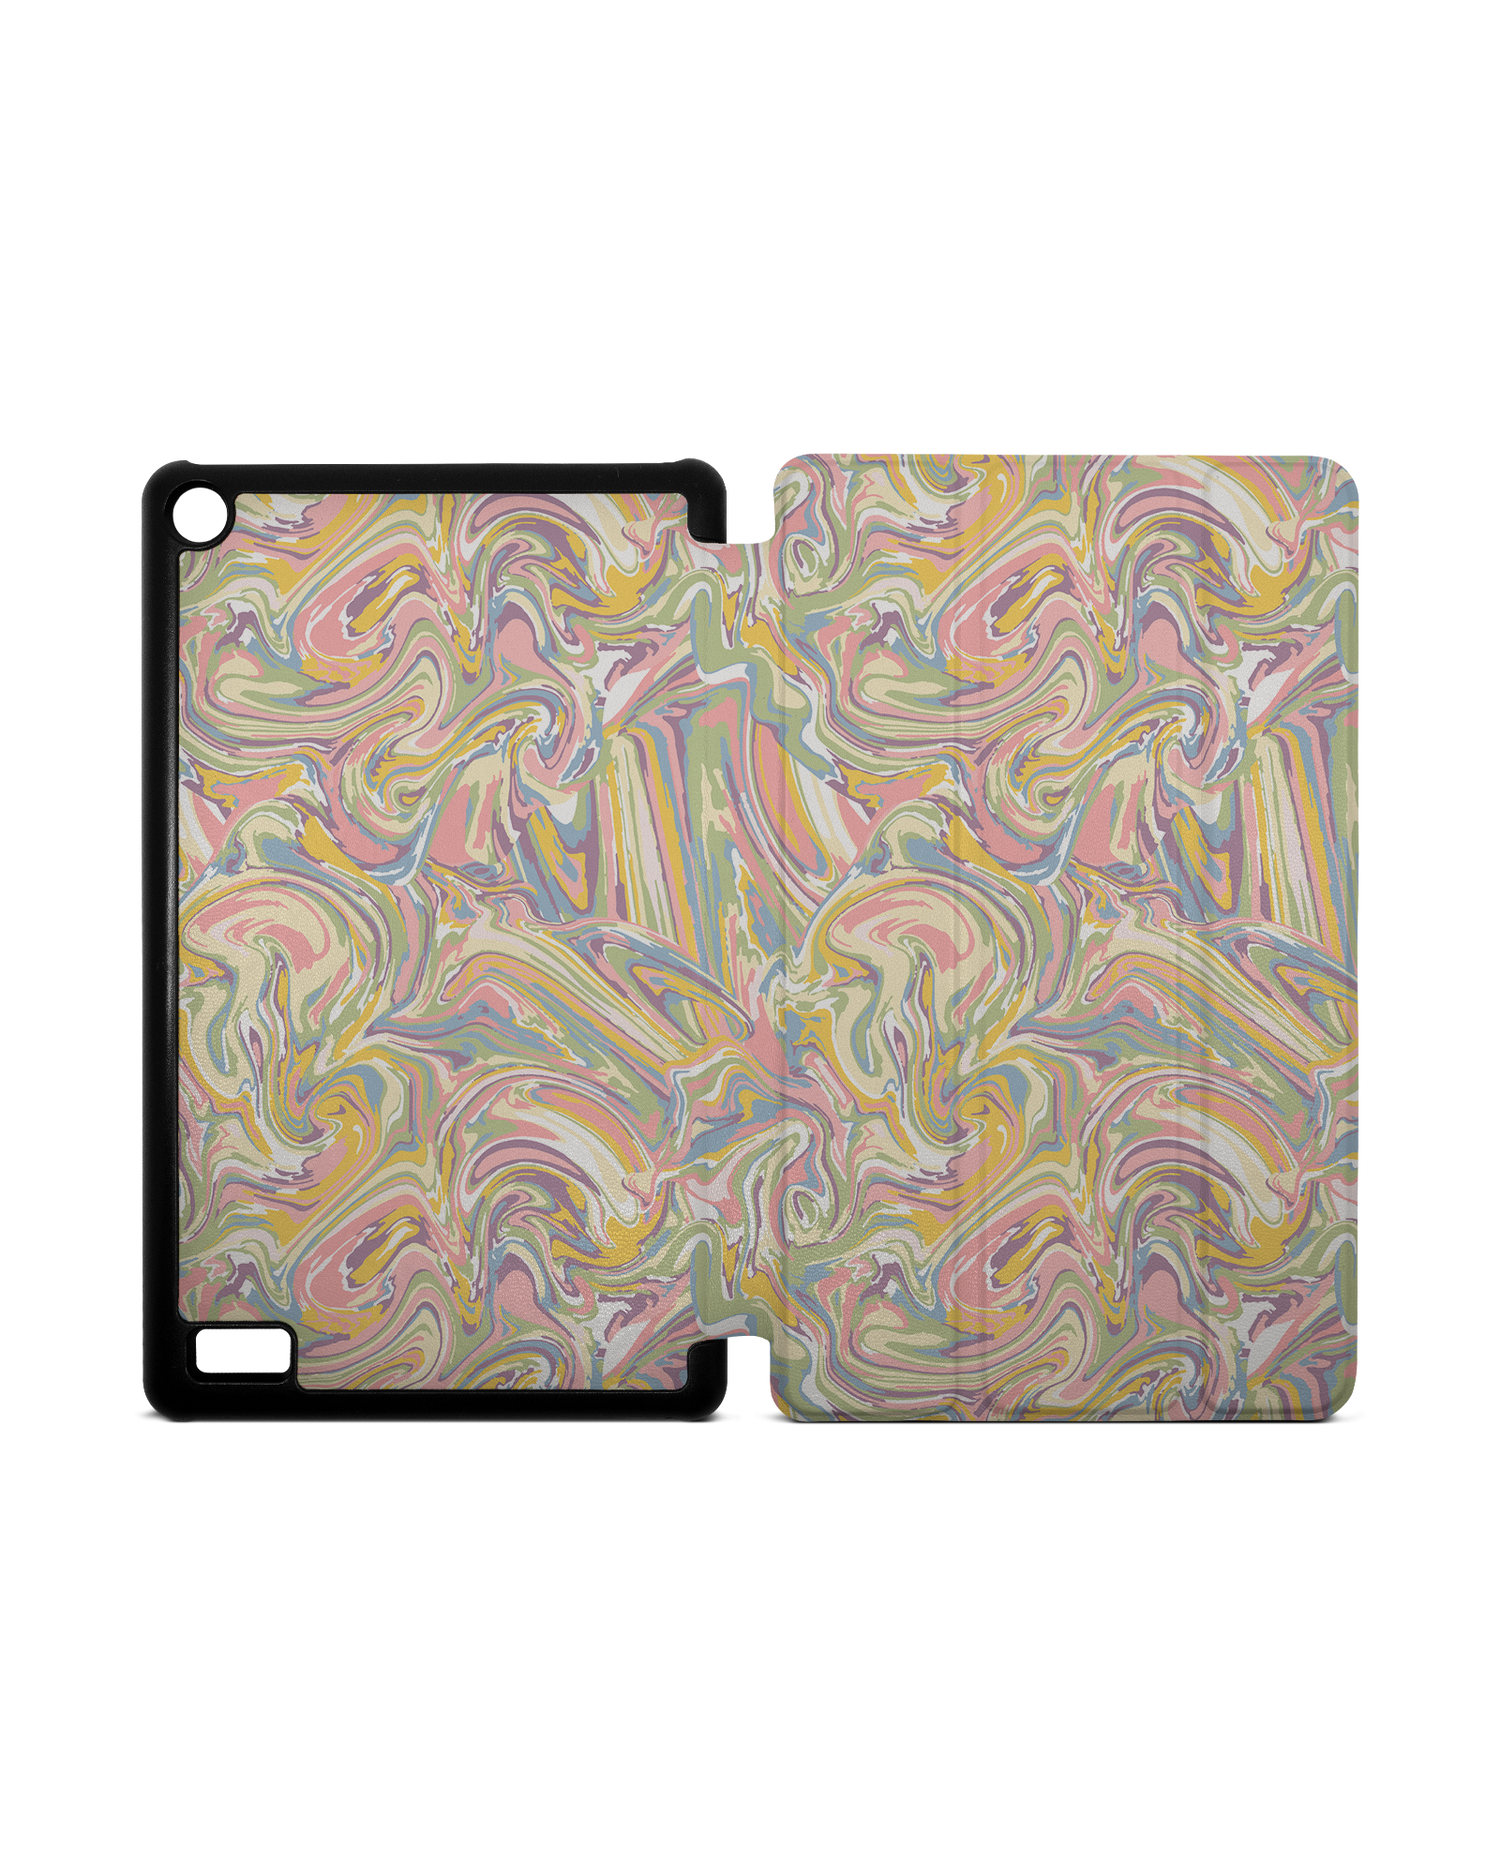 Psychedelic Optics Tablet Smart Case for Amazon Fire 7: Opened